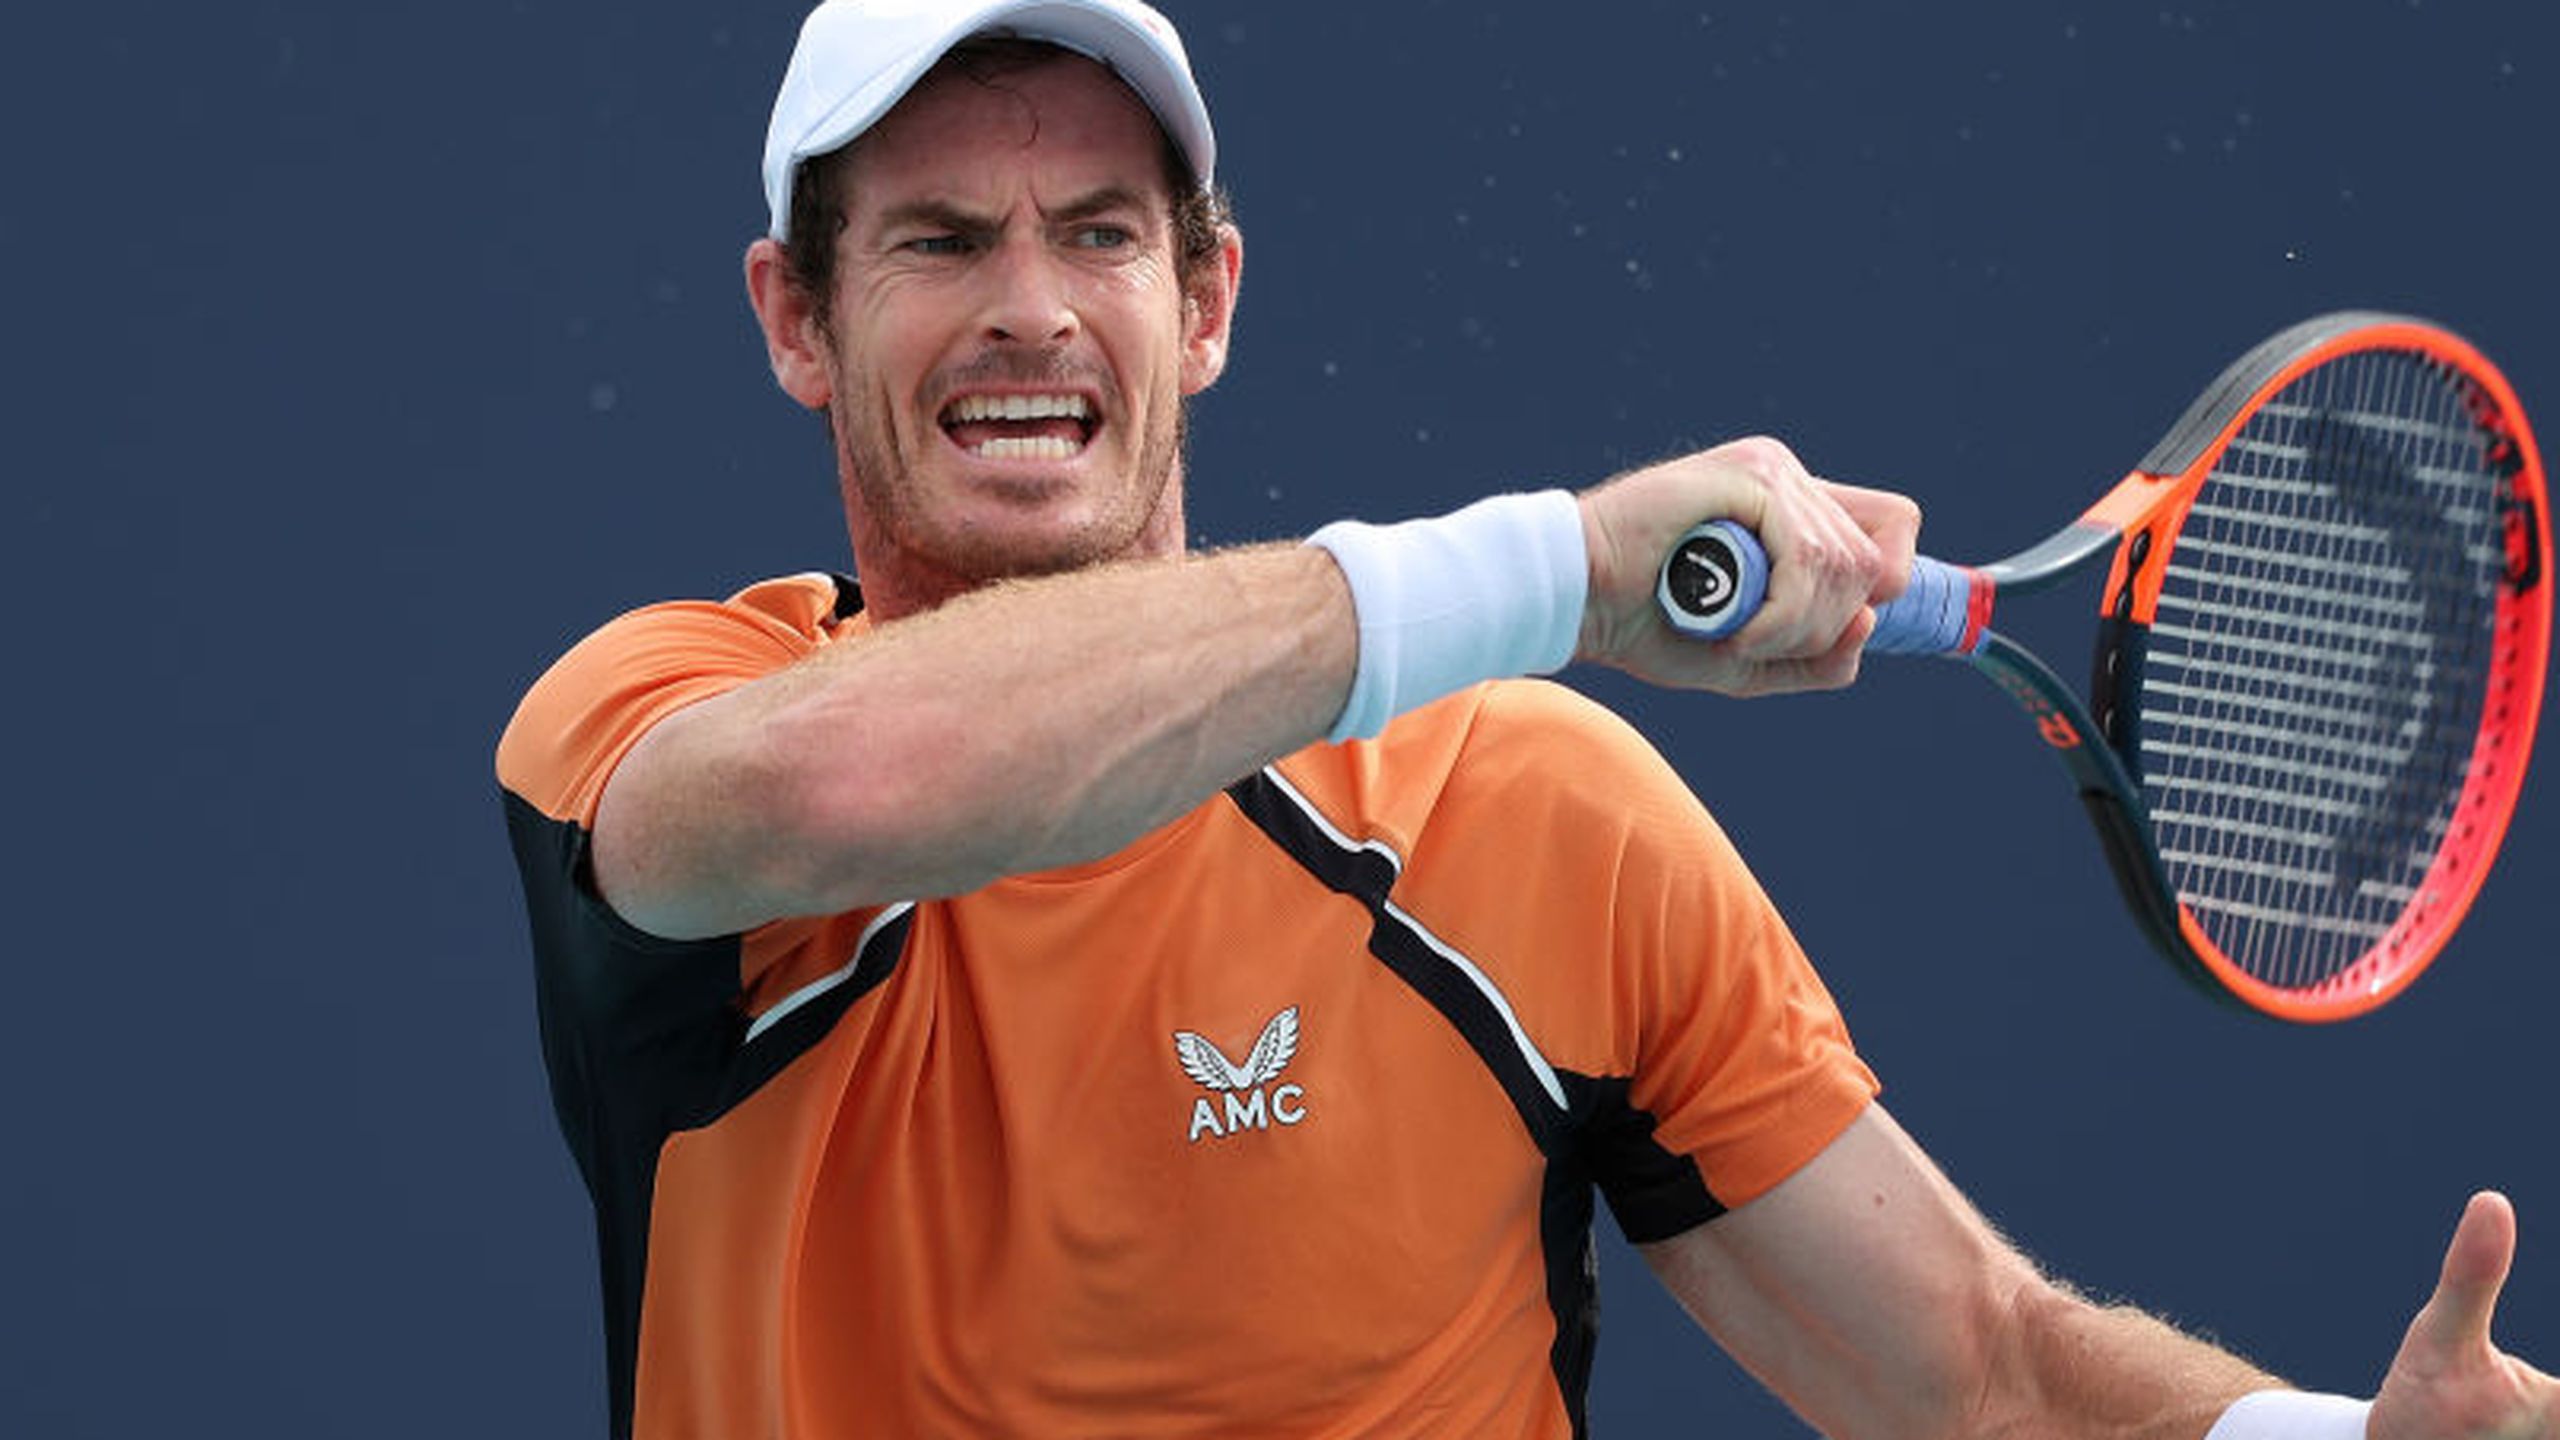 Andy Murray to make return in Bordeaux on ATP Challenger Tour ahead of Geneva and French Open – Eurosport